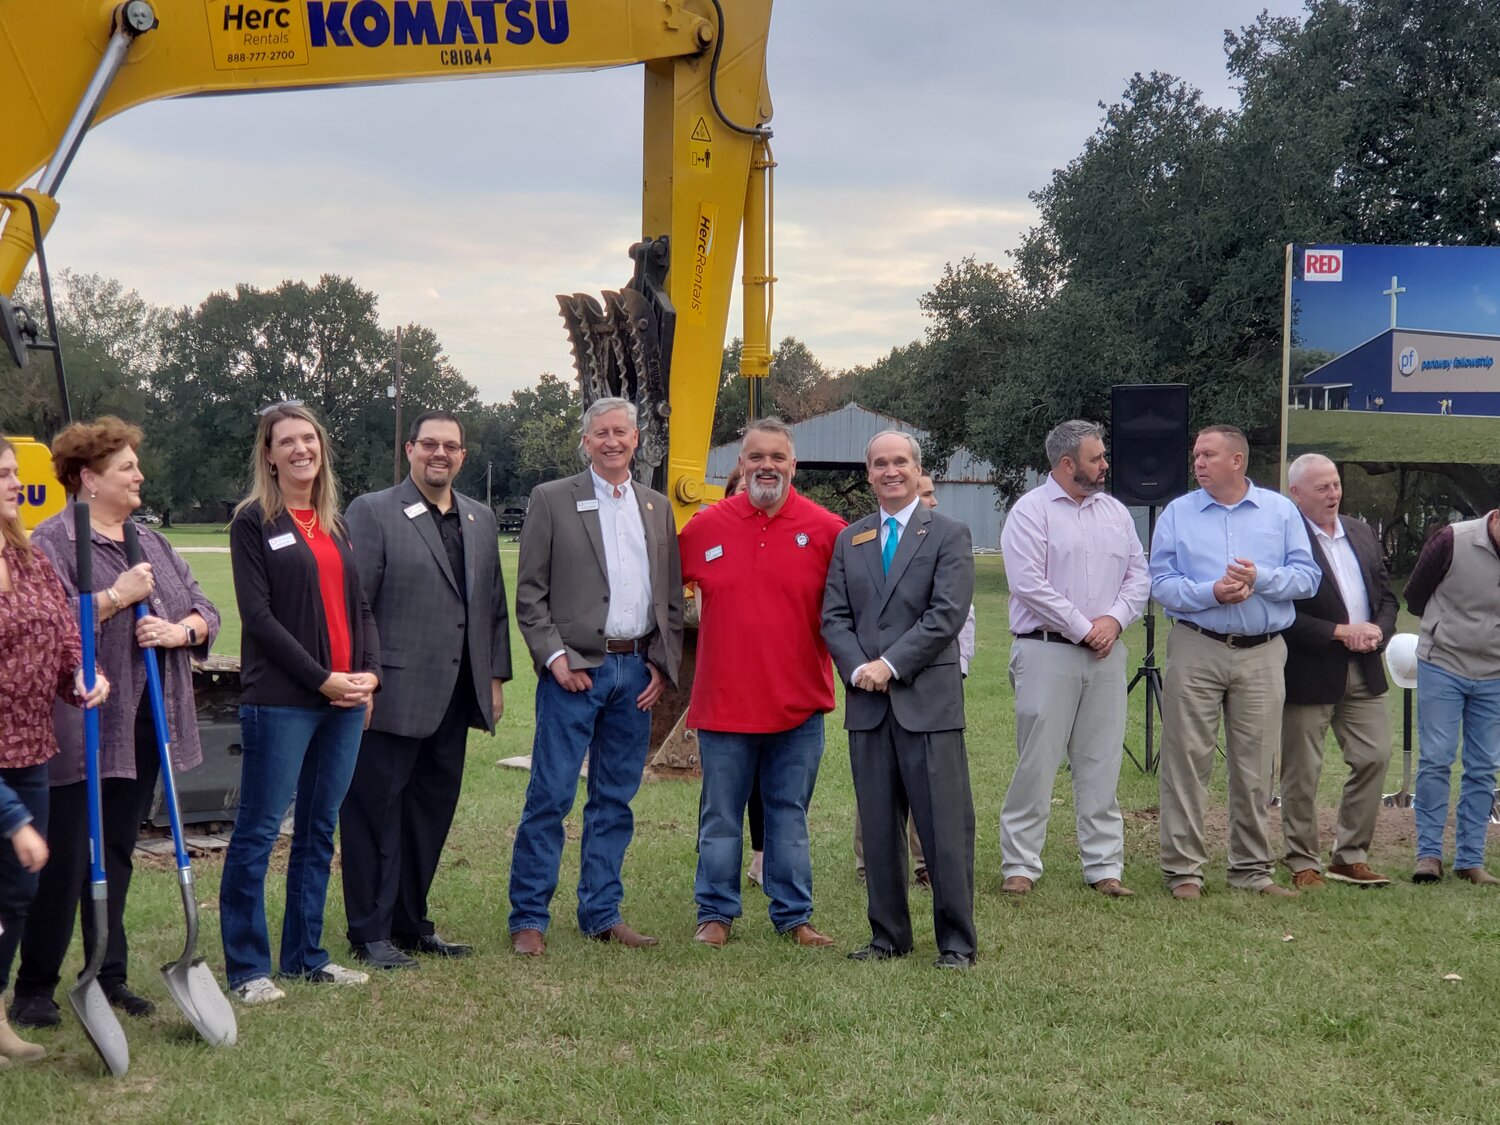 Elected officials who turned out for the groundbreaking included (left to right) City of Katy Councilmember Gina Hicks, Mayor Pro Tem Chris Harris, Katy Mayor Dusty Thiele, Councilmemeber Rory Robertson and Texas State Representative Mike Schofield.